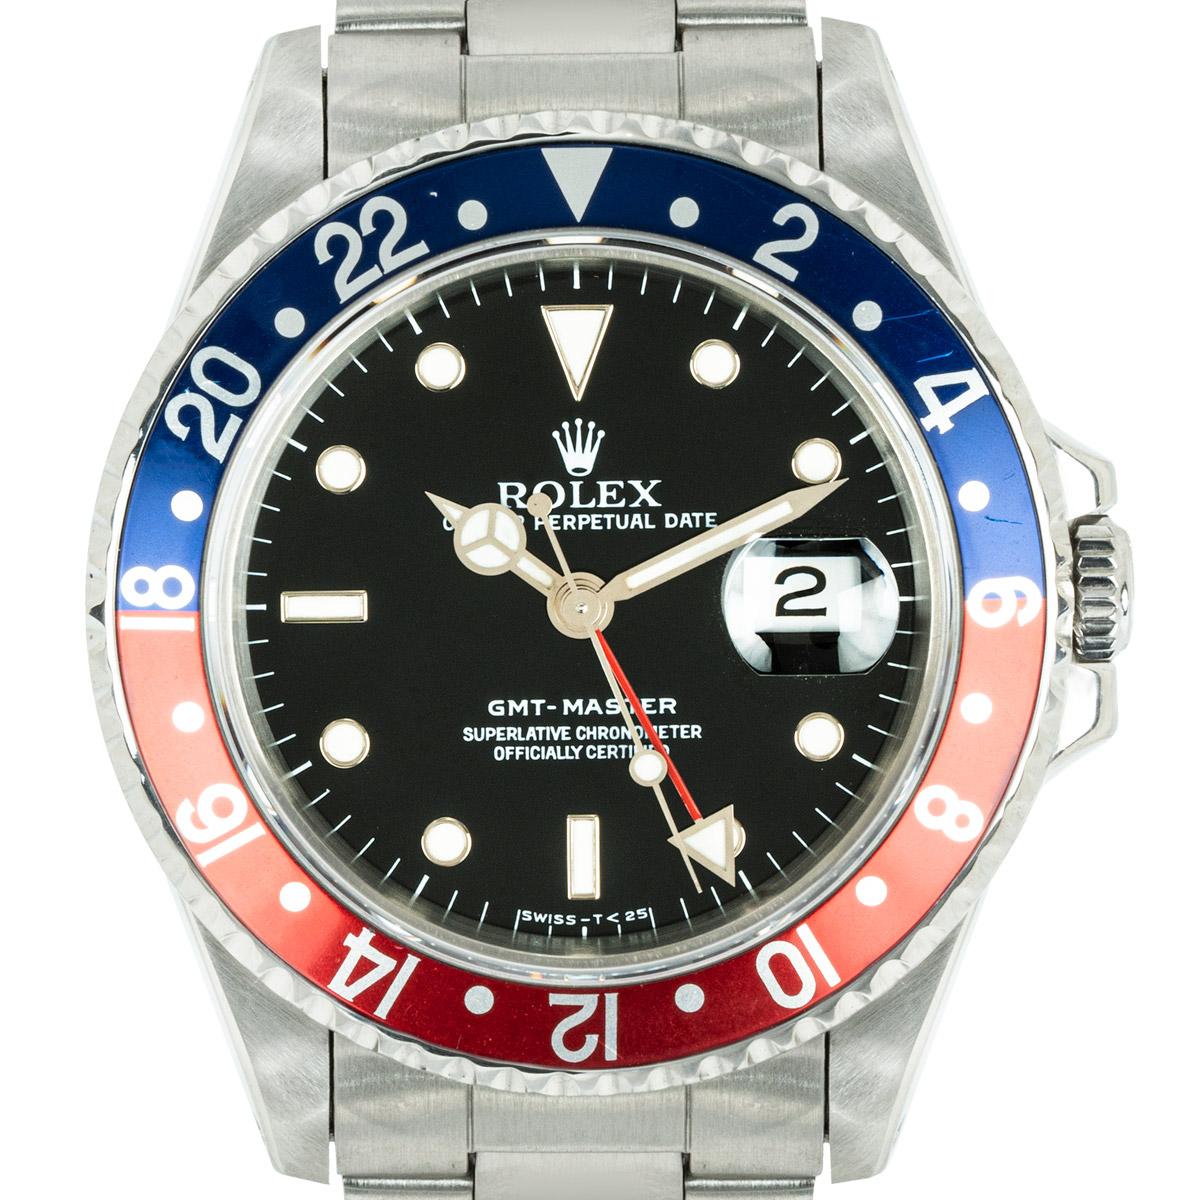 A stainless steel GMT-Master Pepsi wristwatch. Featuring a black dial with applied hour markers, a date aperture and a red second-time zone hand. Complimenting the dial is a stainless steel bi-directional rotating bezel which features a blue and red